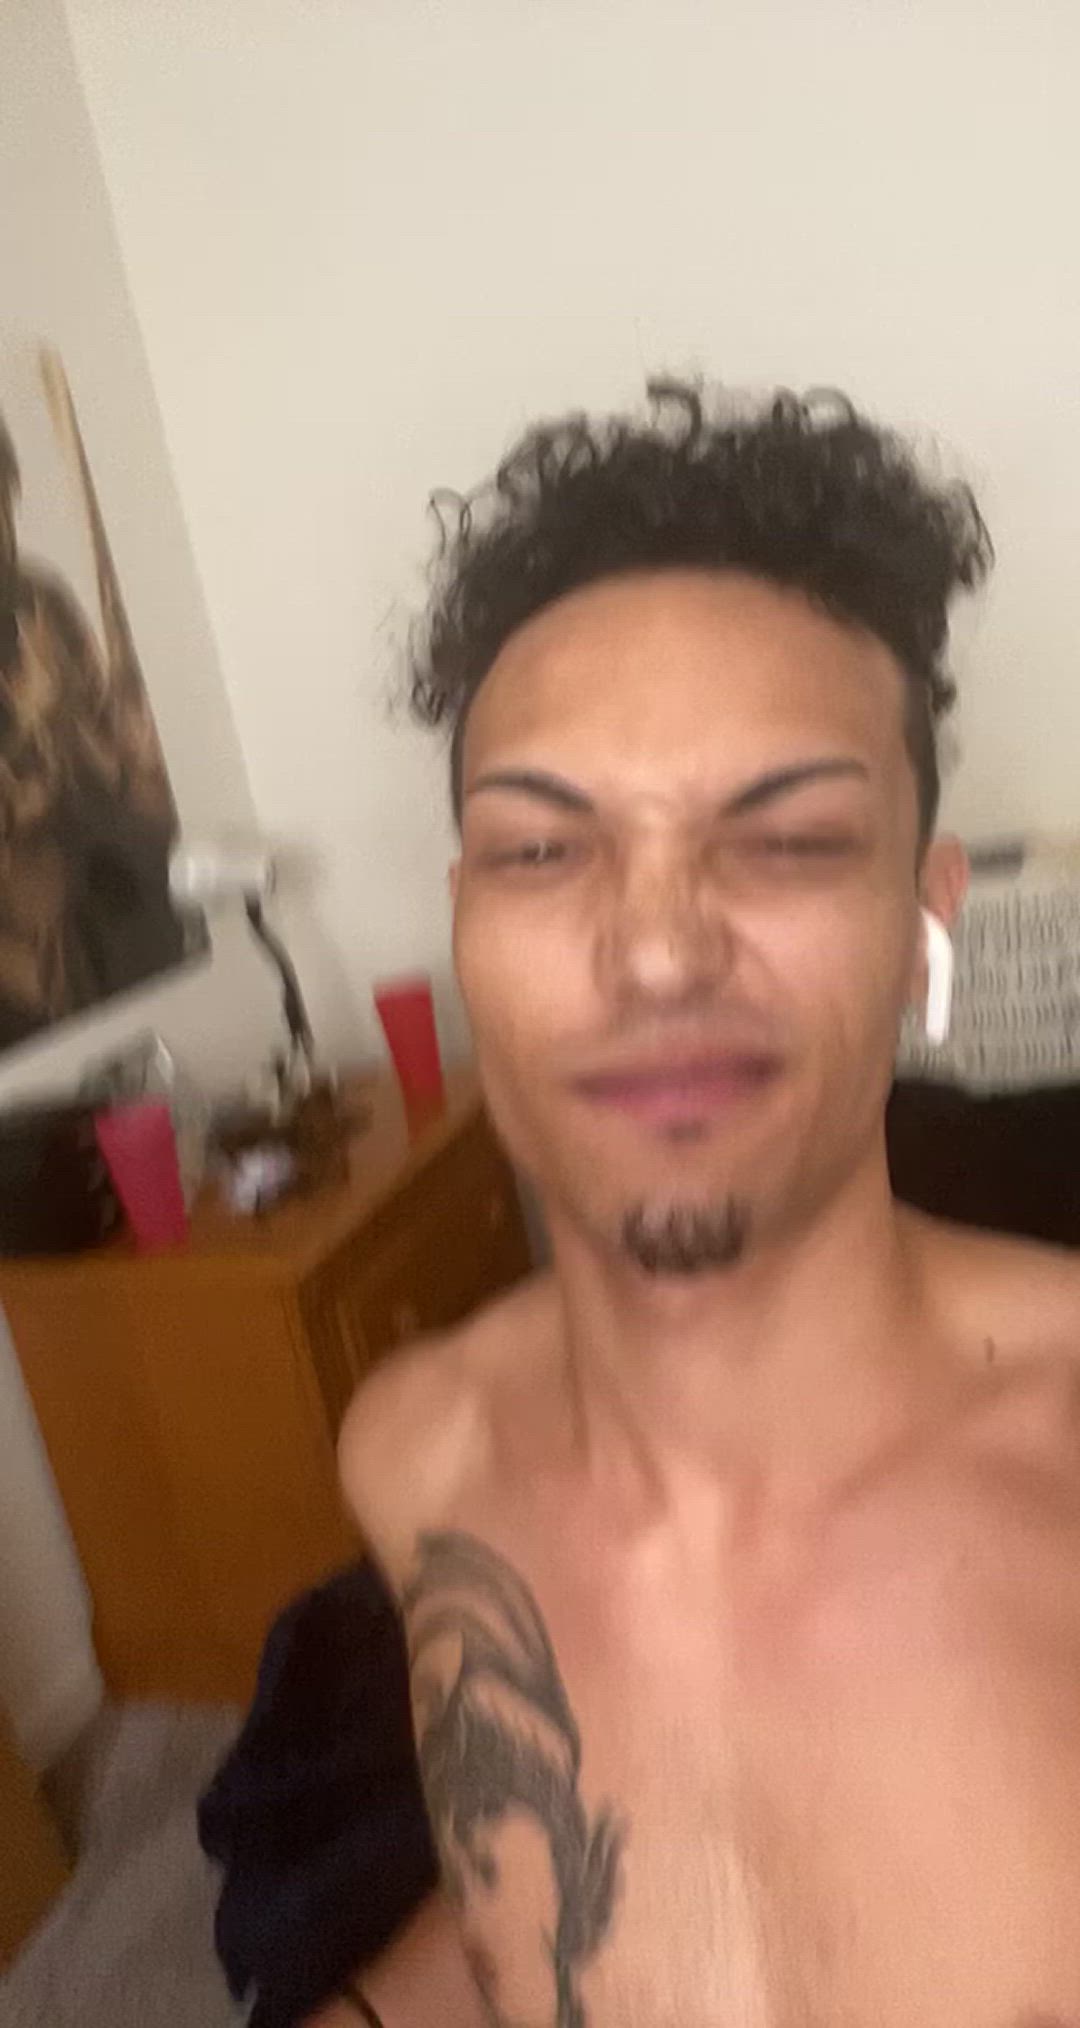 Big Dick porn video with onlyfans model Lightskin Zorro <strong>@lightskin.zorro</strong>